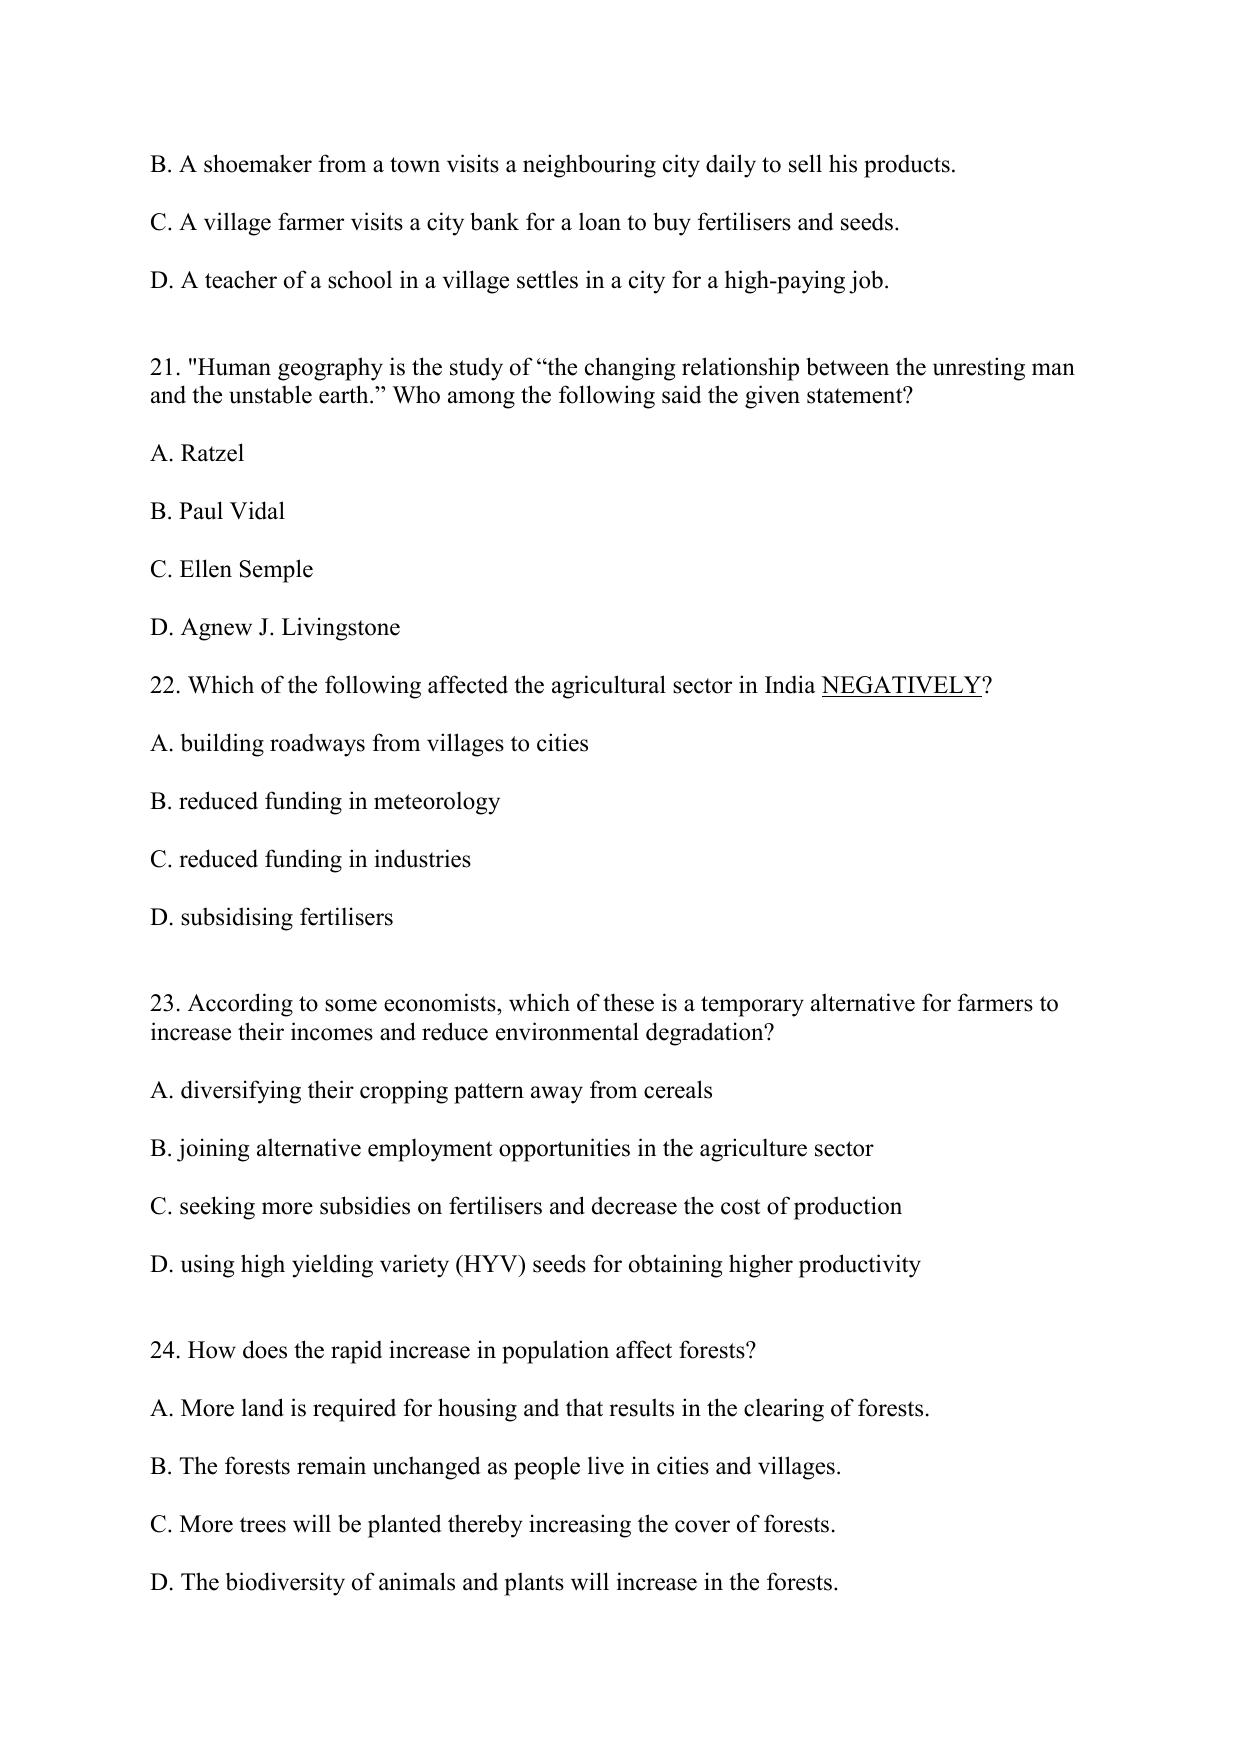 CBSE Class 12 Geography Term 1 Practice Questions 2021-22 - Page 7